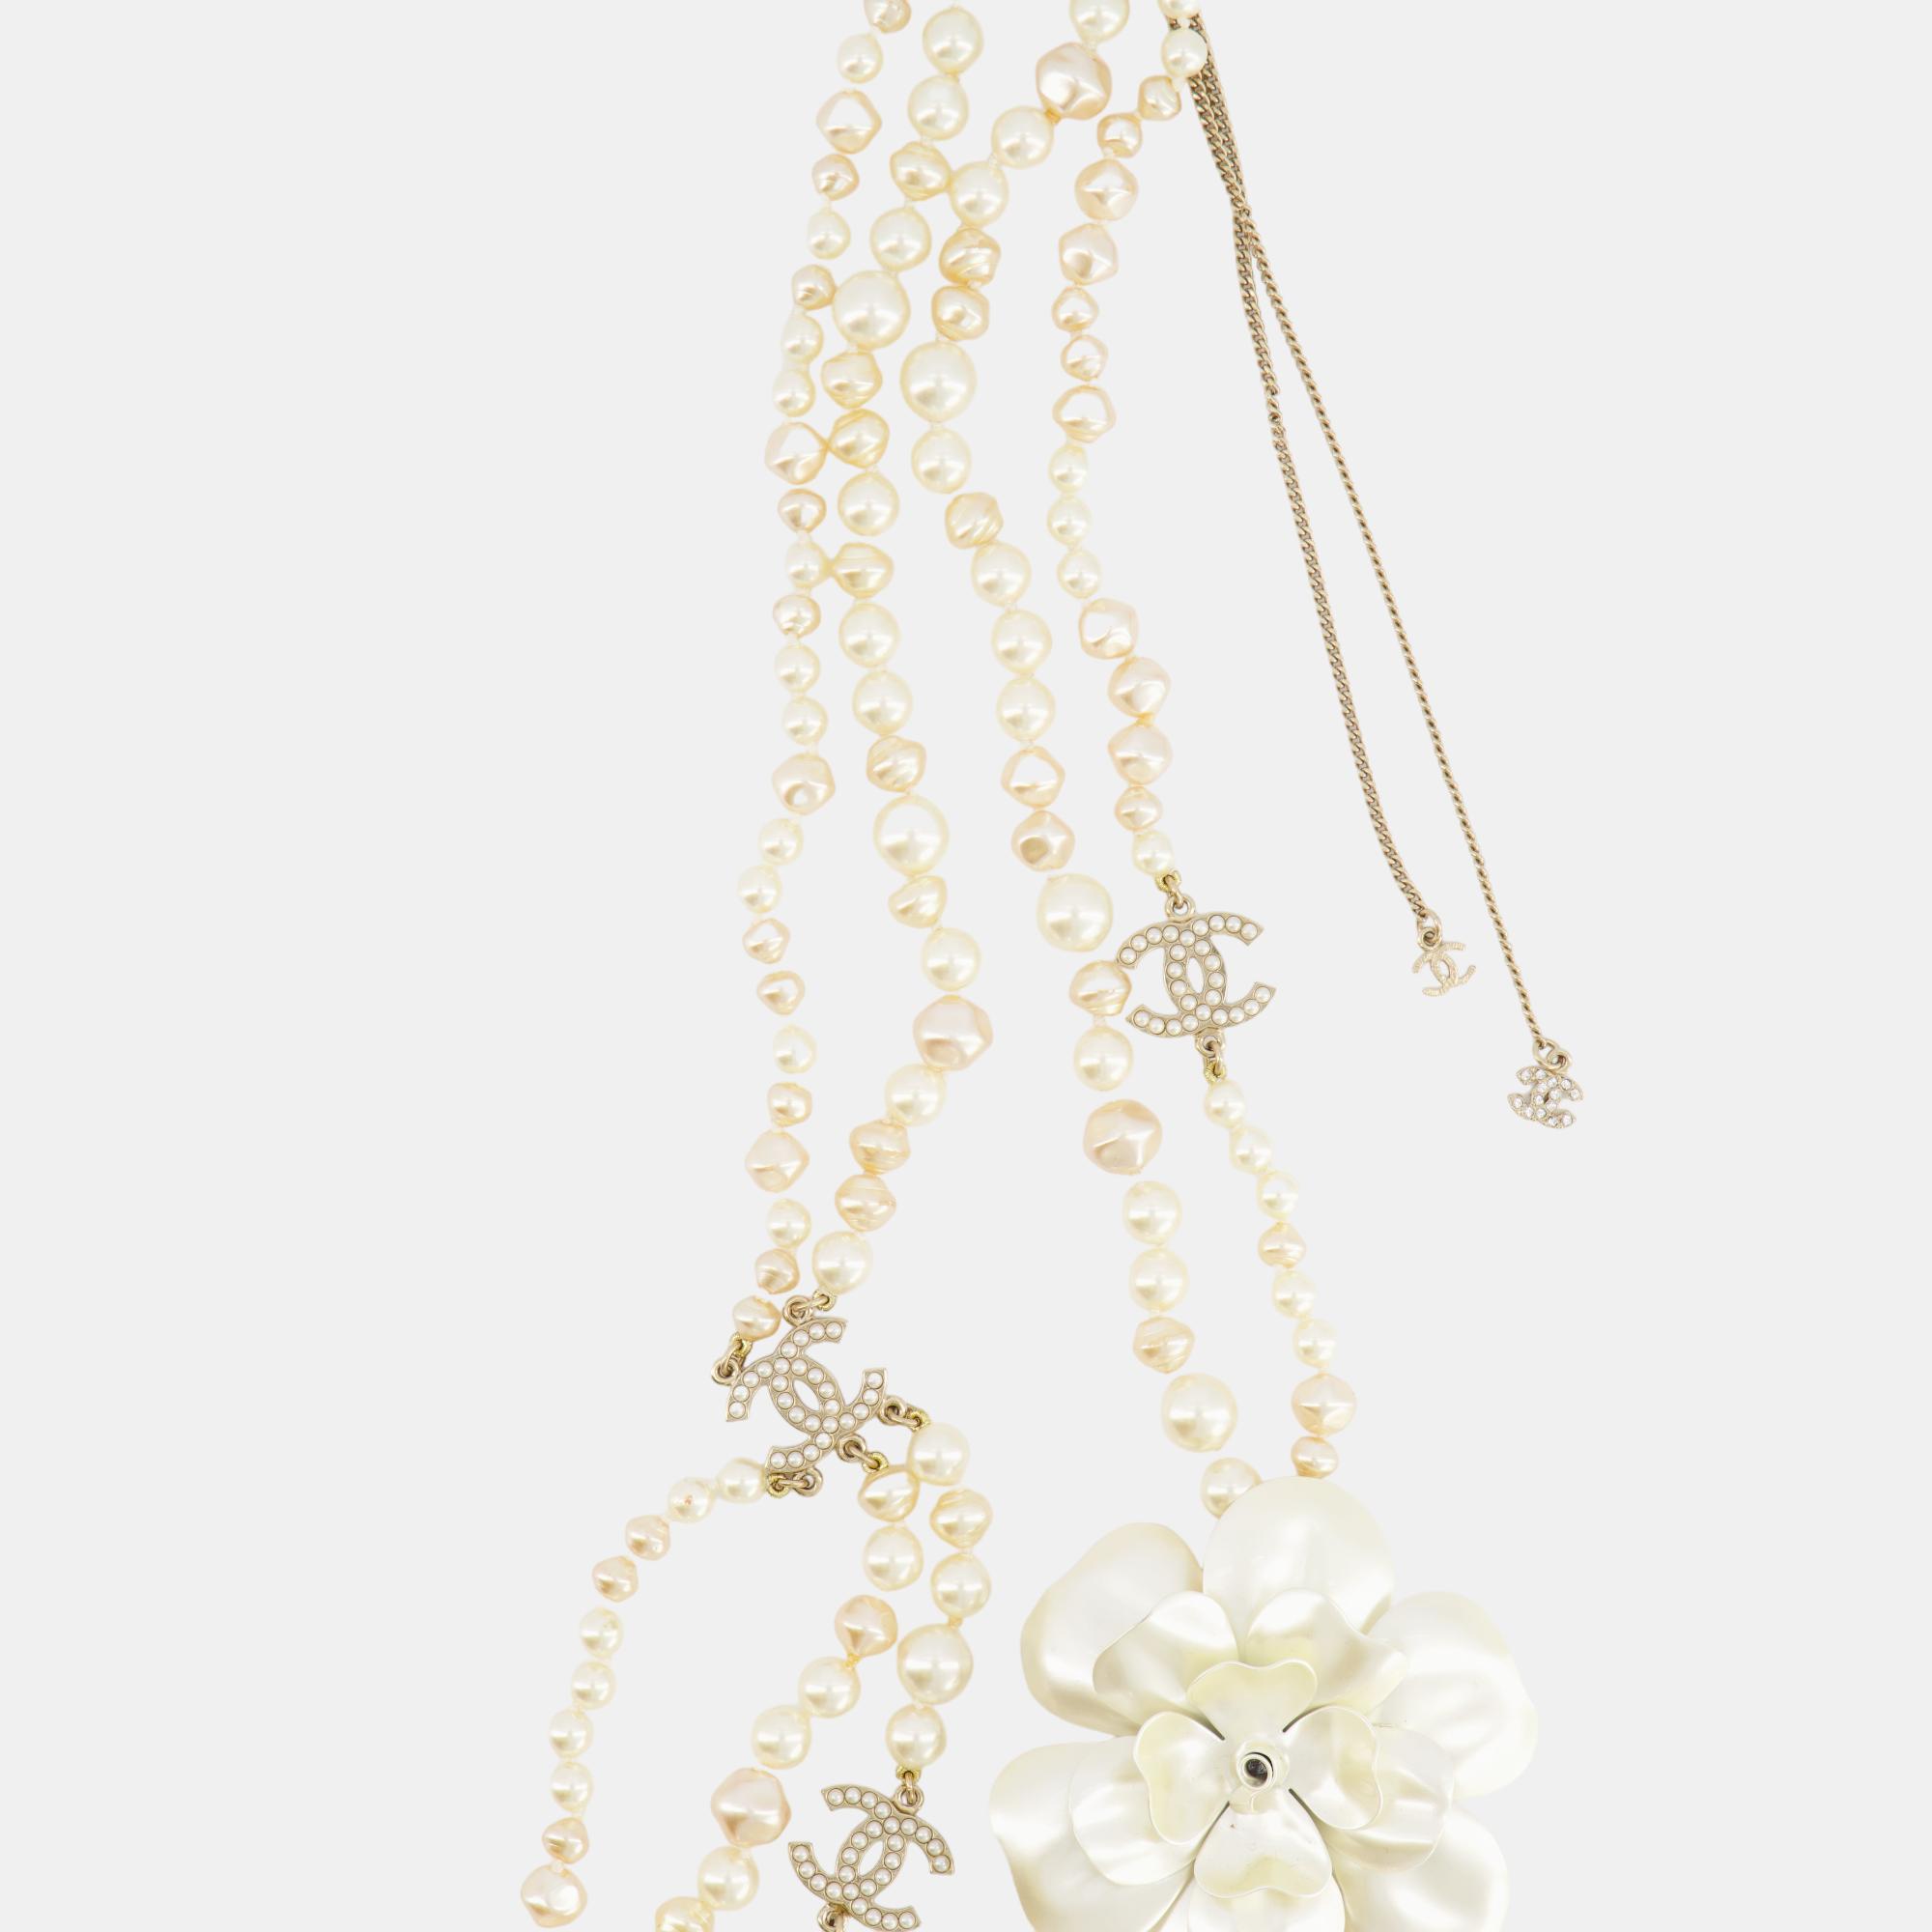 Chanel White Pearls With Gold CC Logo Details And Camelia Flower Necklace